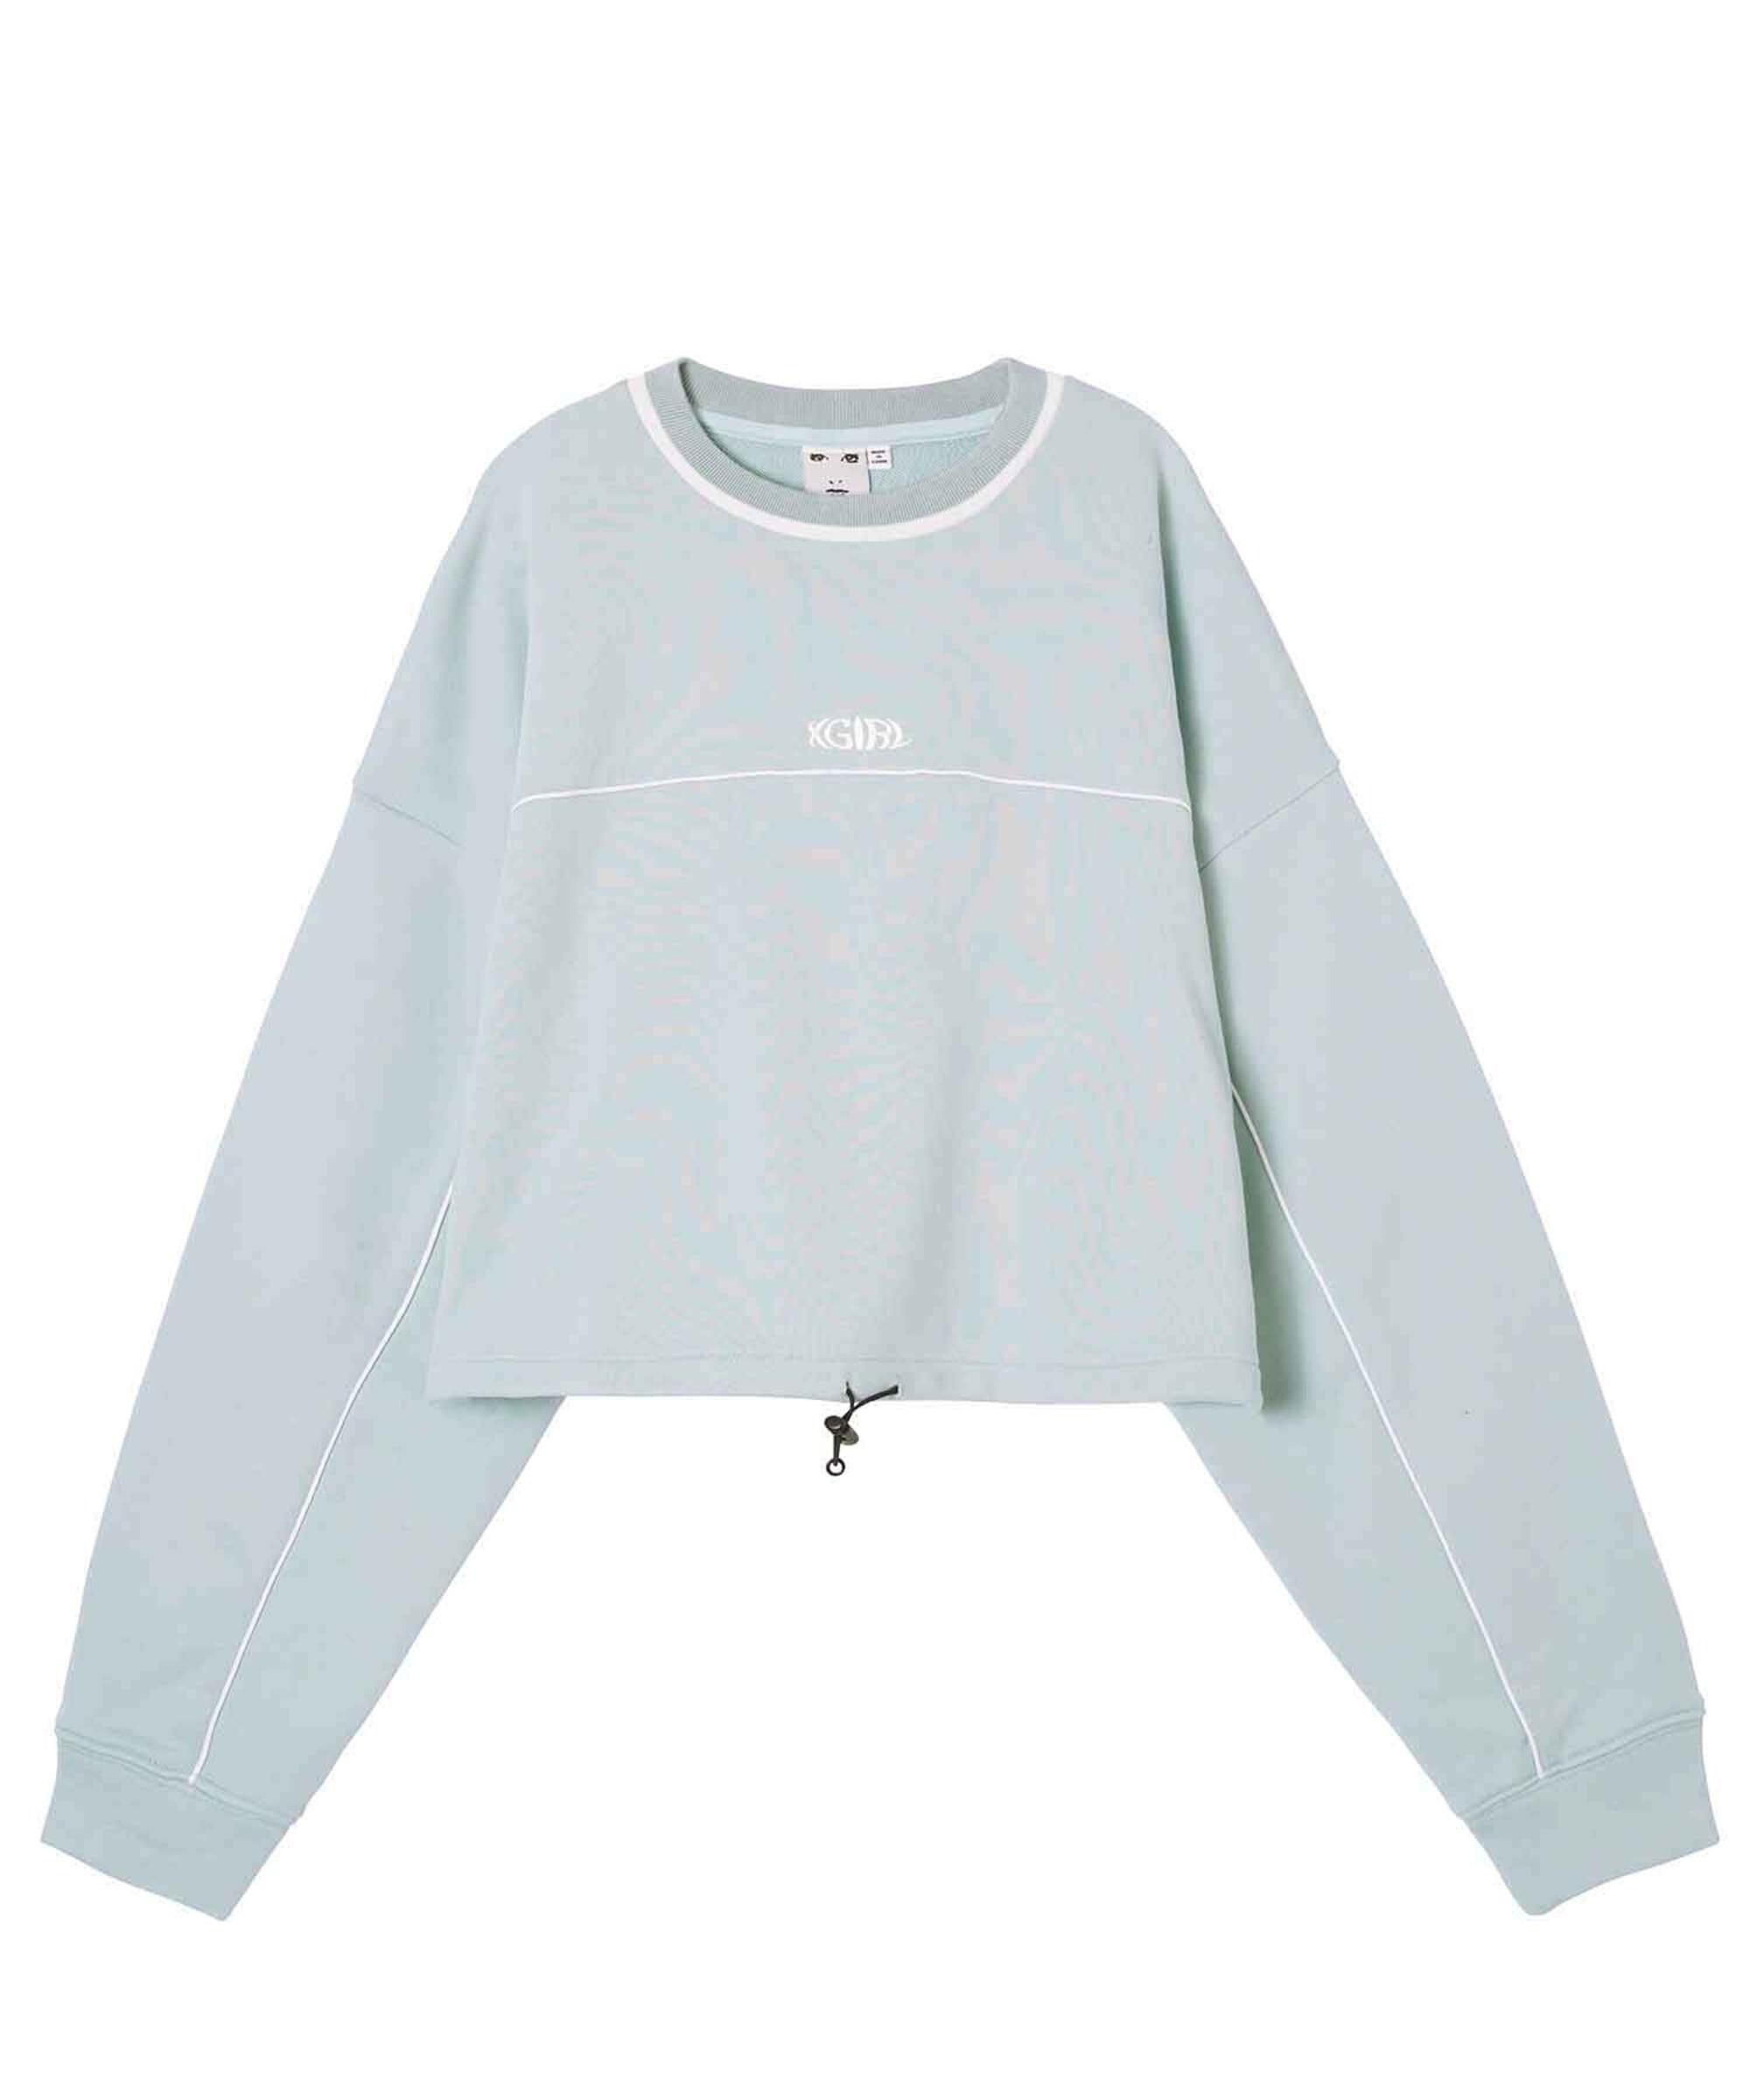 XGirl Contrast Line Cropped Sweat Top - Light Blue